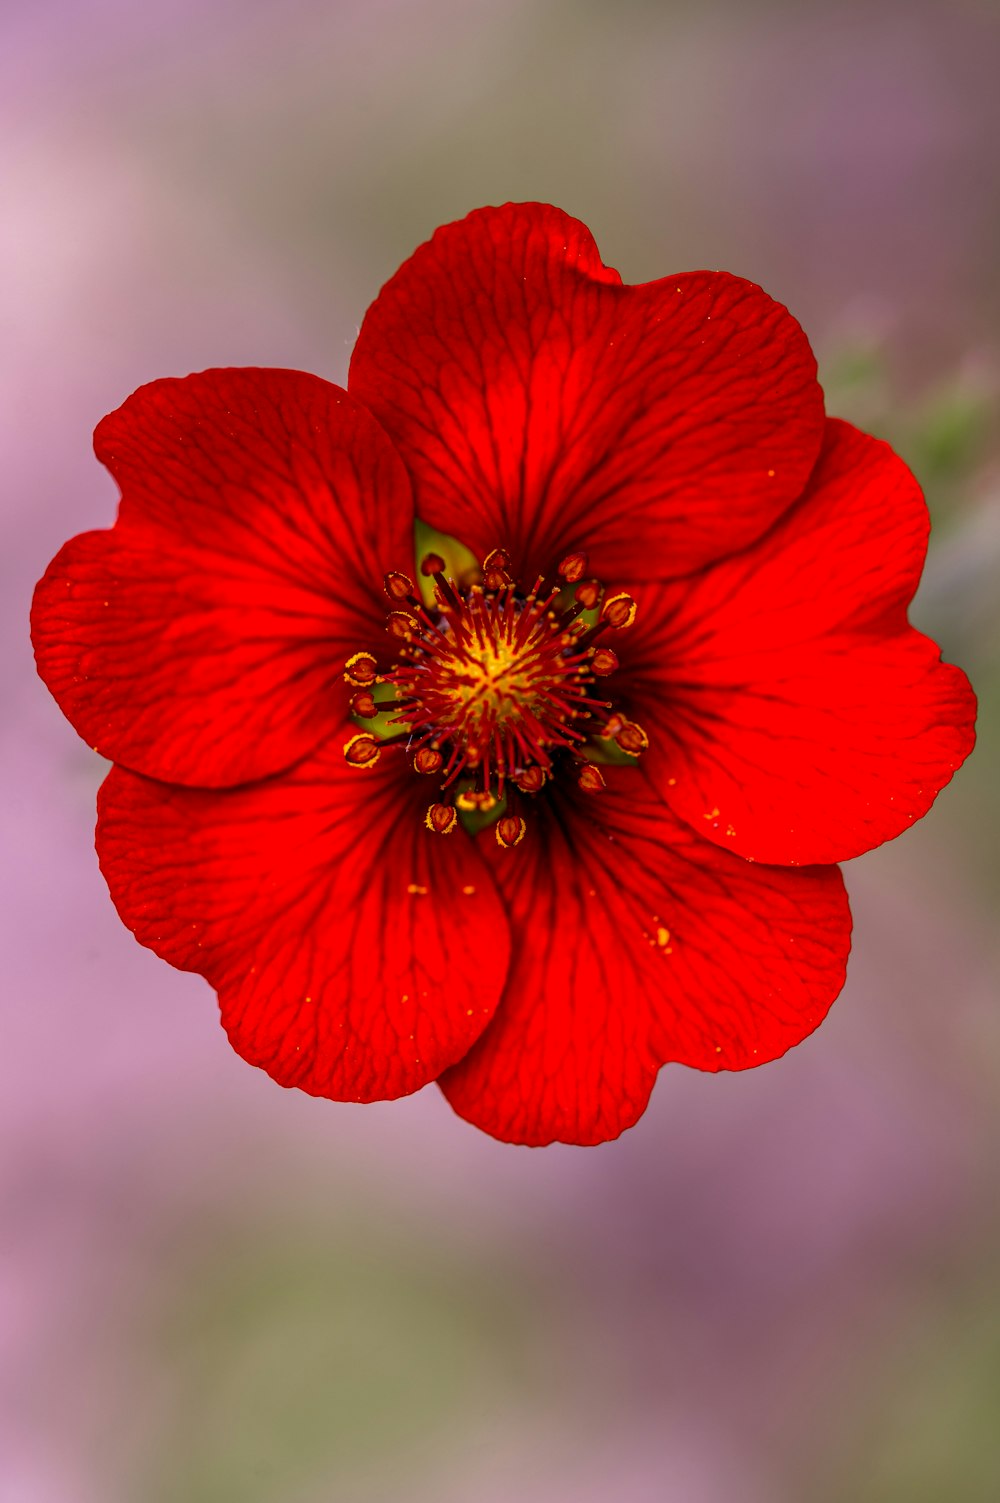 a red flower with a green center on a purple background